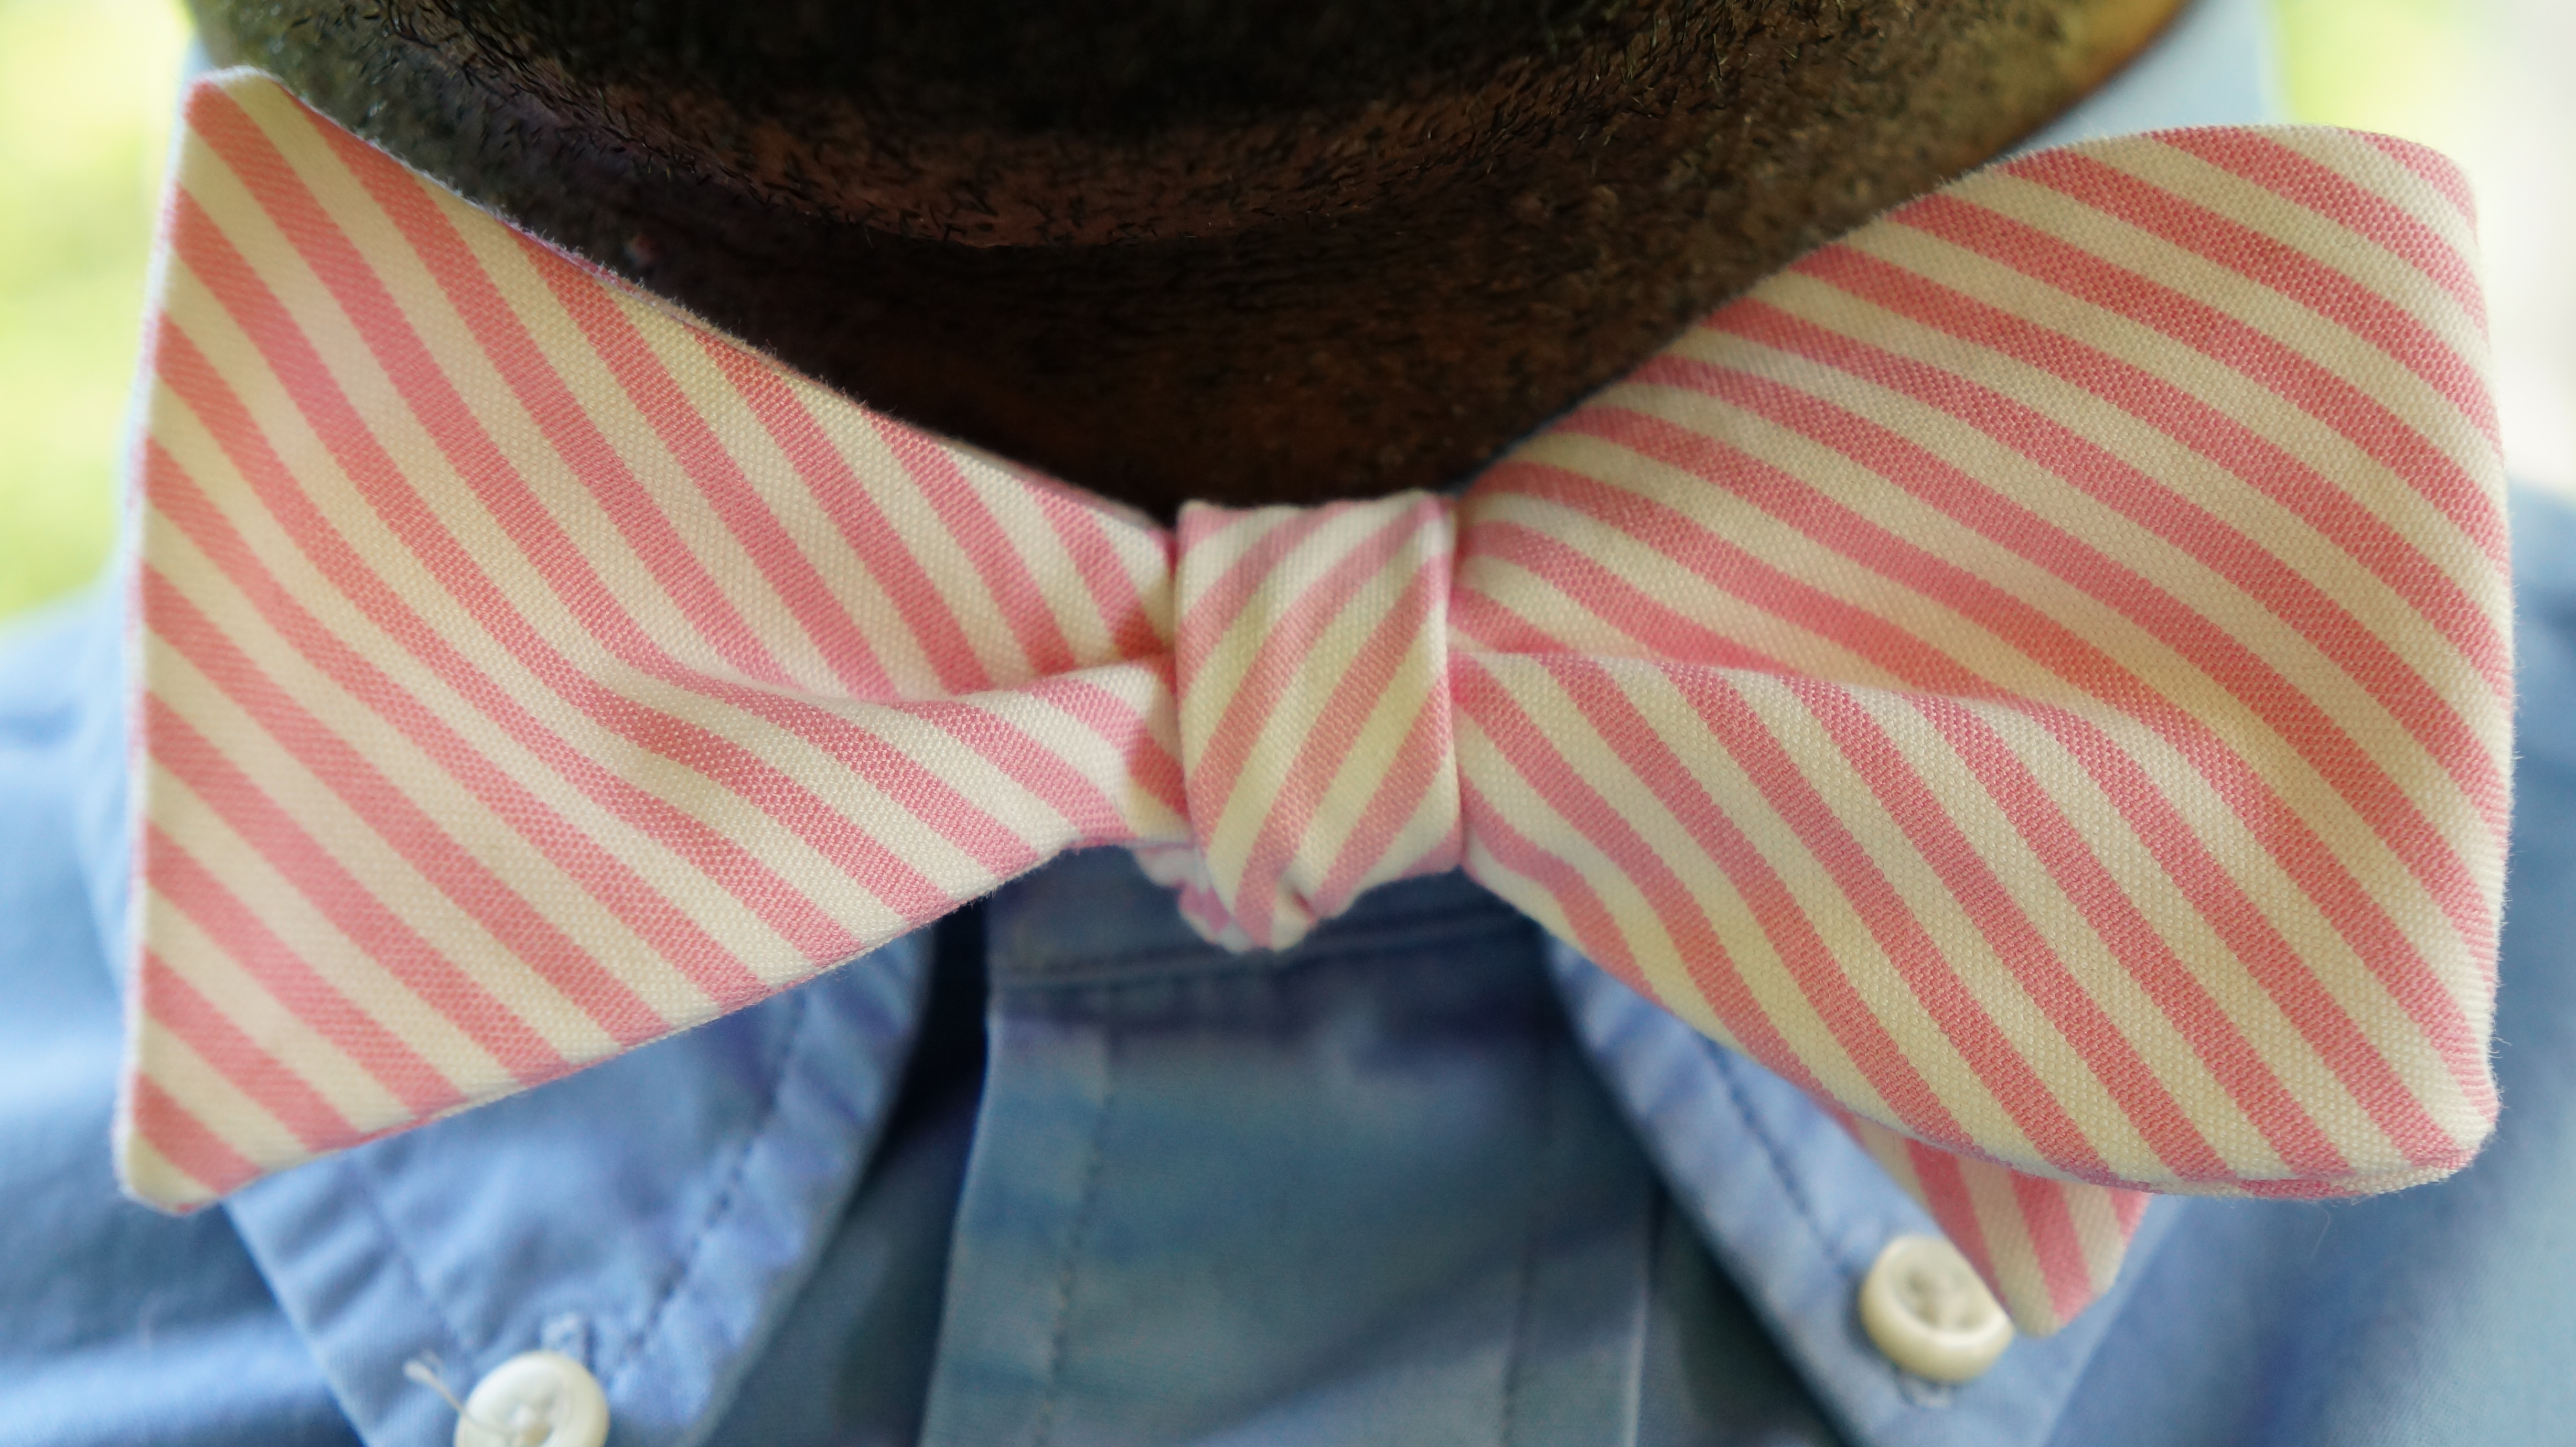 Headline for The Bow Tie Naming Rights Contest (pink and white)